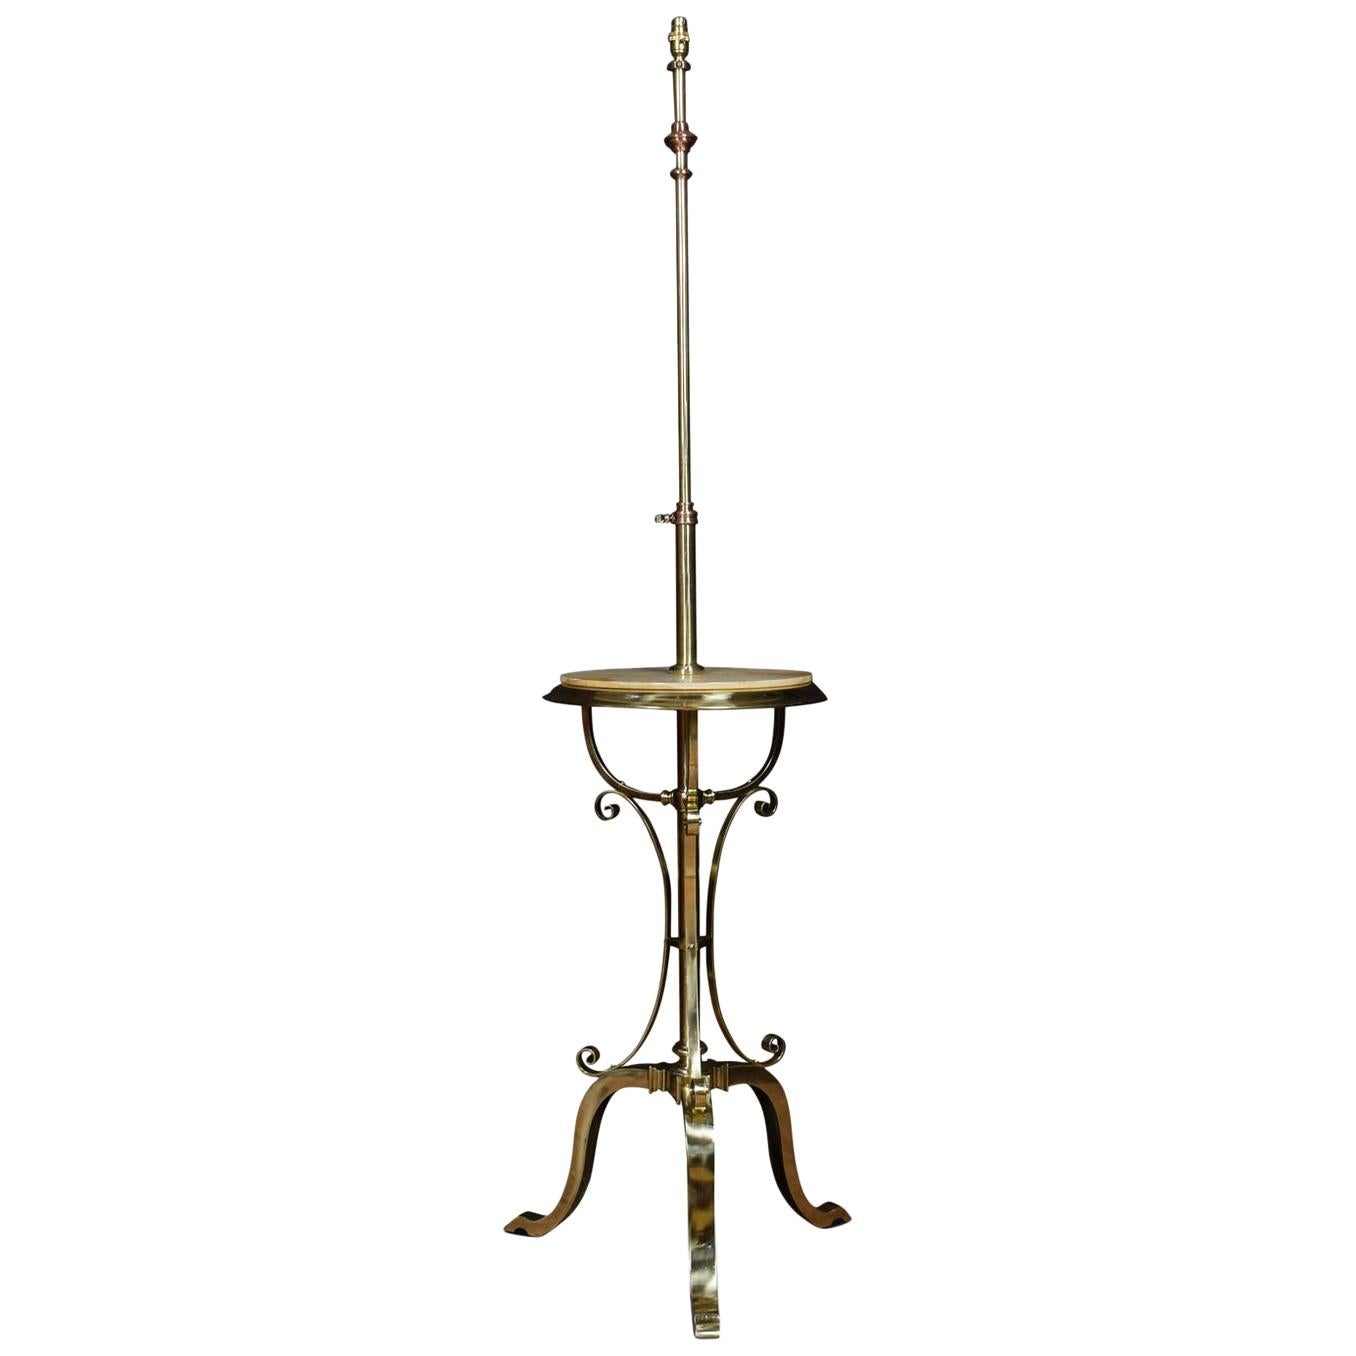 Brass and Copper Standard Lamp in the Manner of W.A.S. Benson